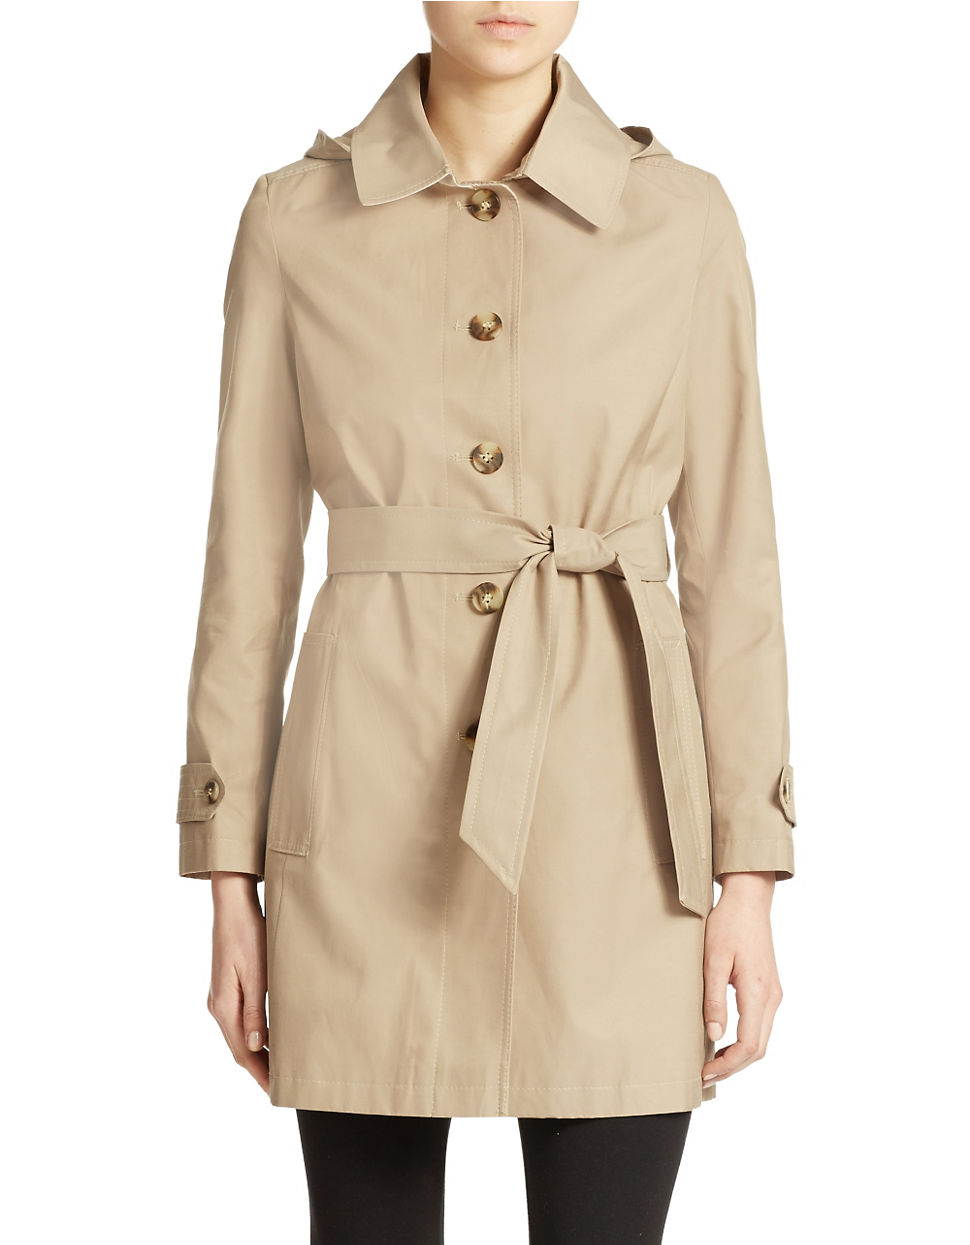 Lyst - Dkny Single Breasted Hooded Trench Coat in Natural